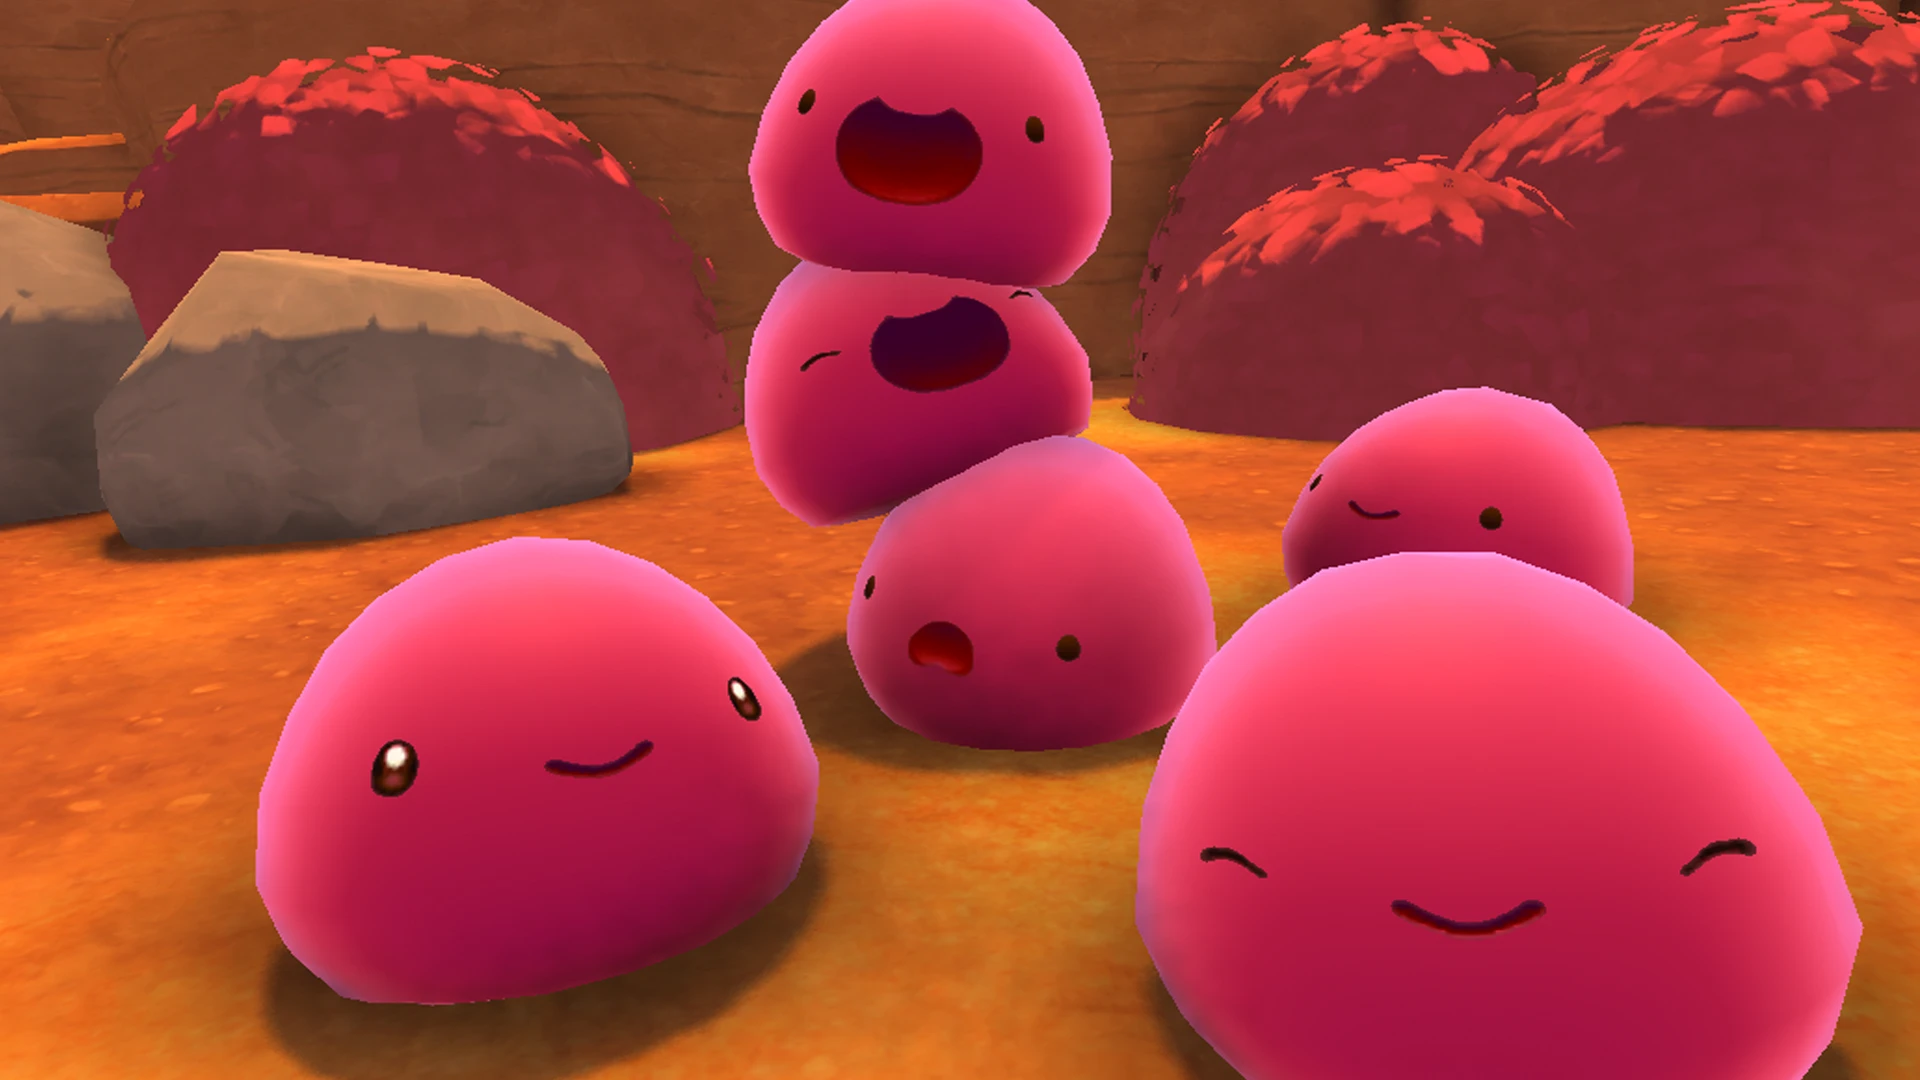 Slime Rancher 2 Nexus - Mods and Community